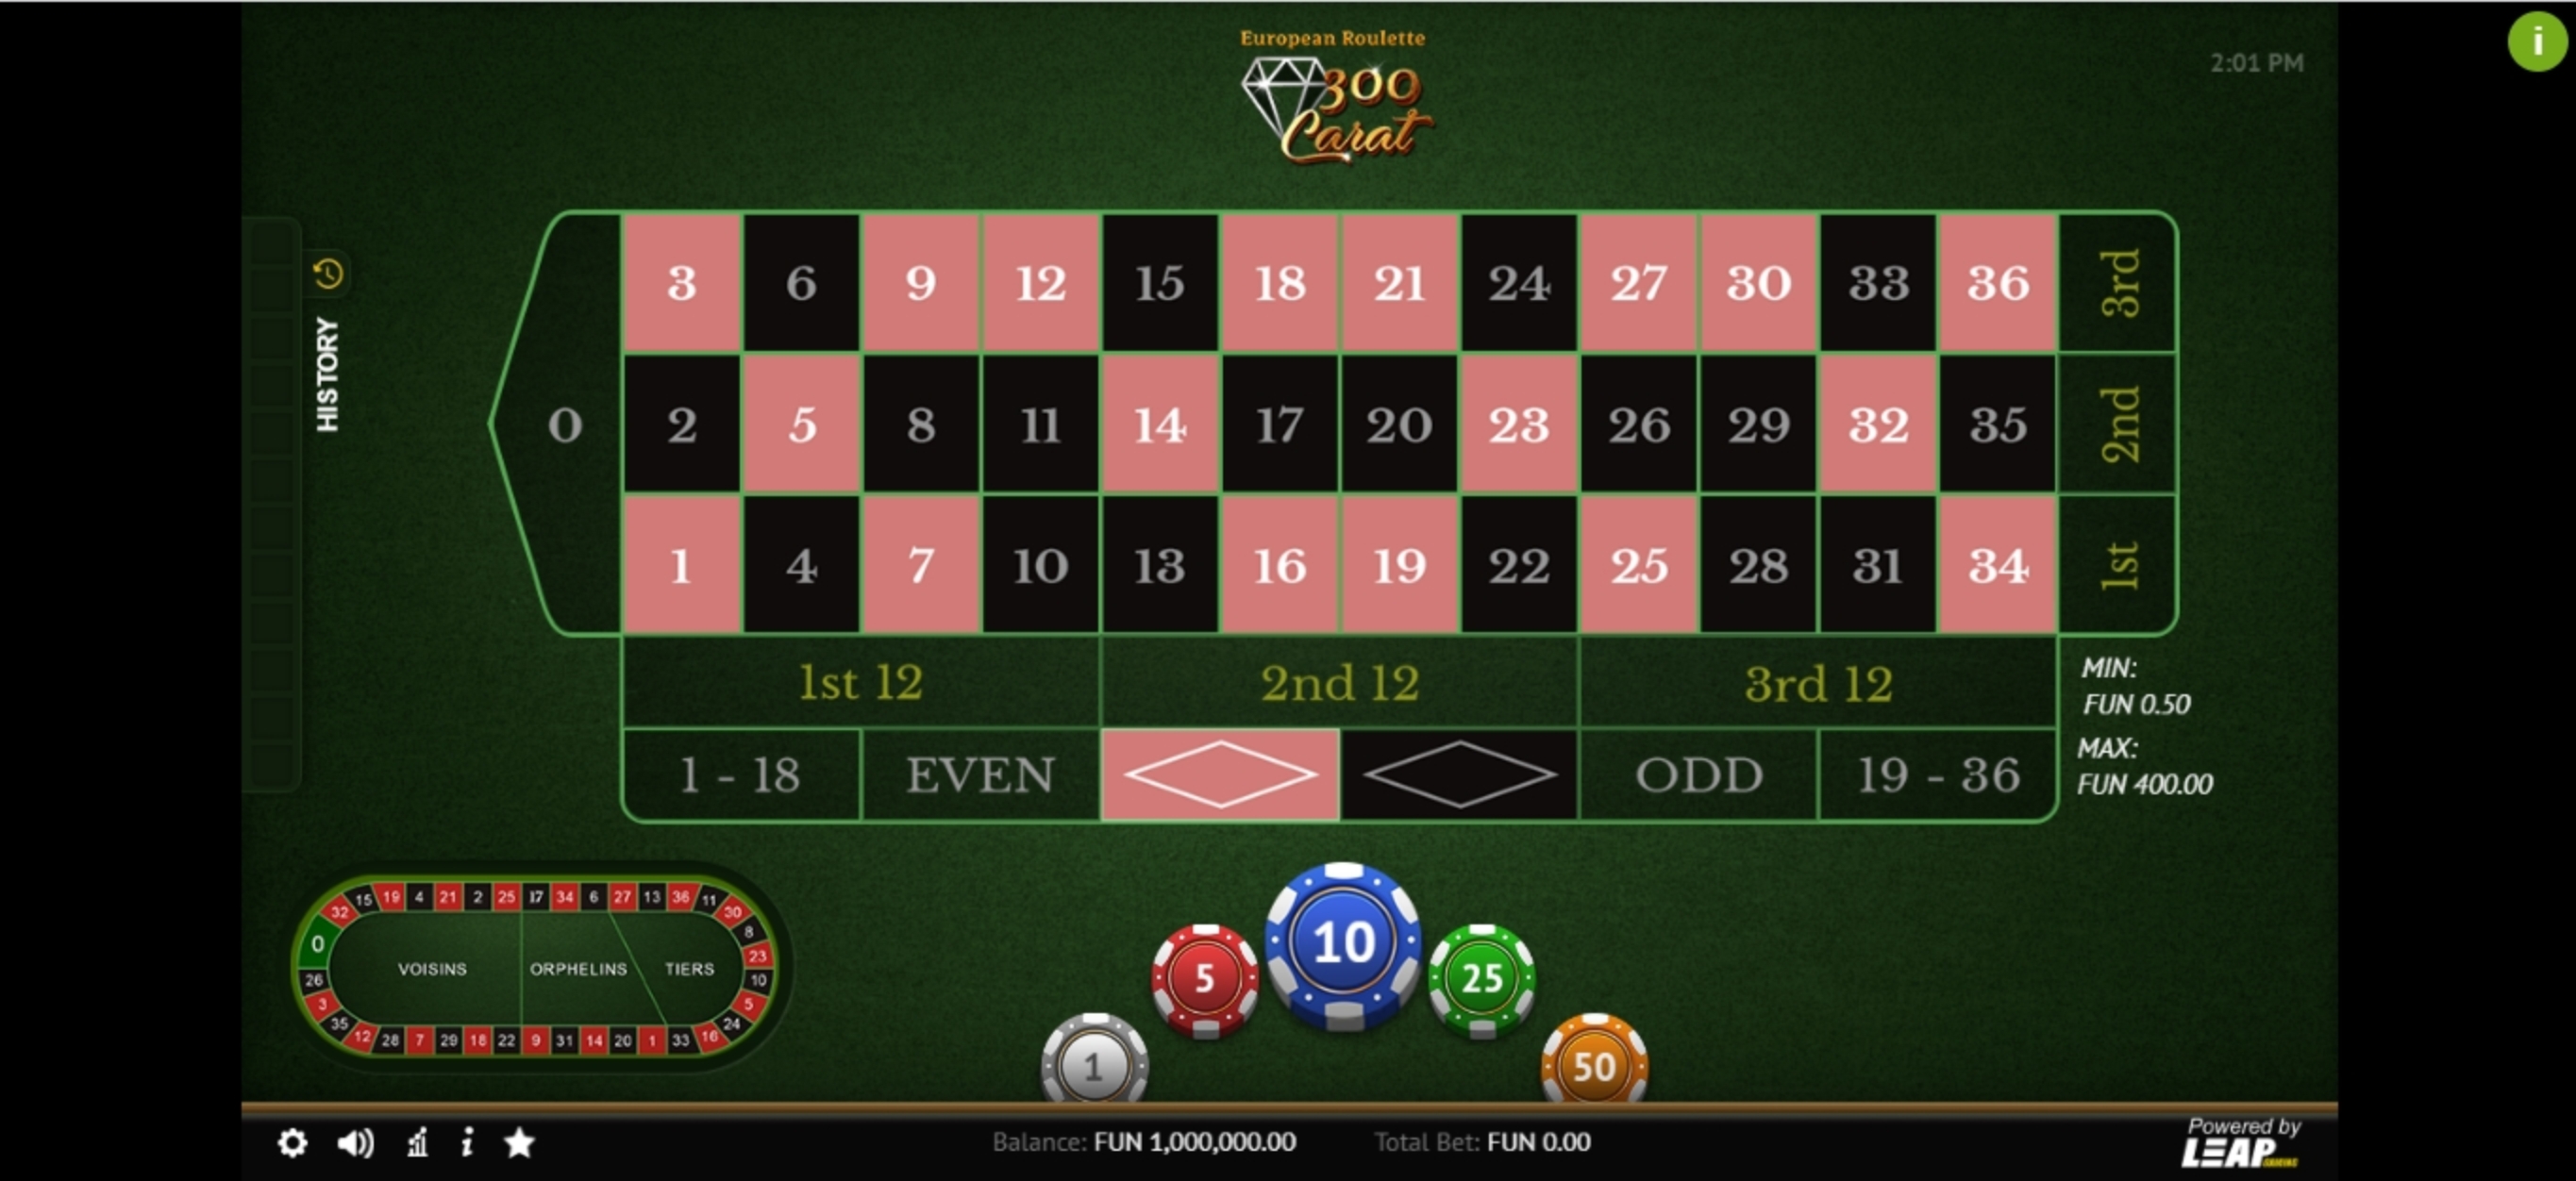 Reels in 300 Carat Roulette Slot Game by Leap